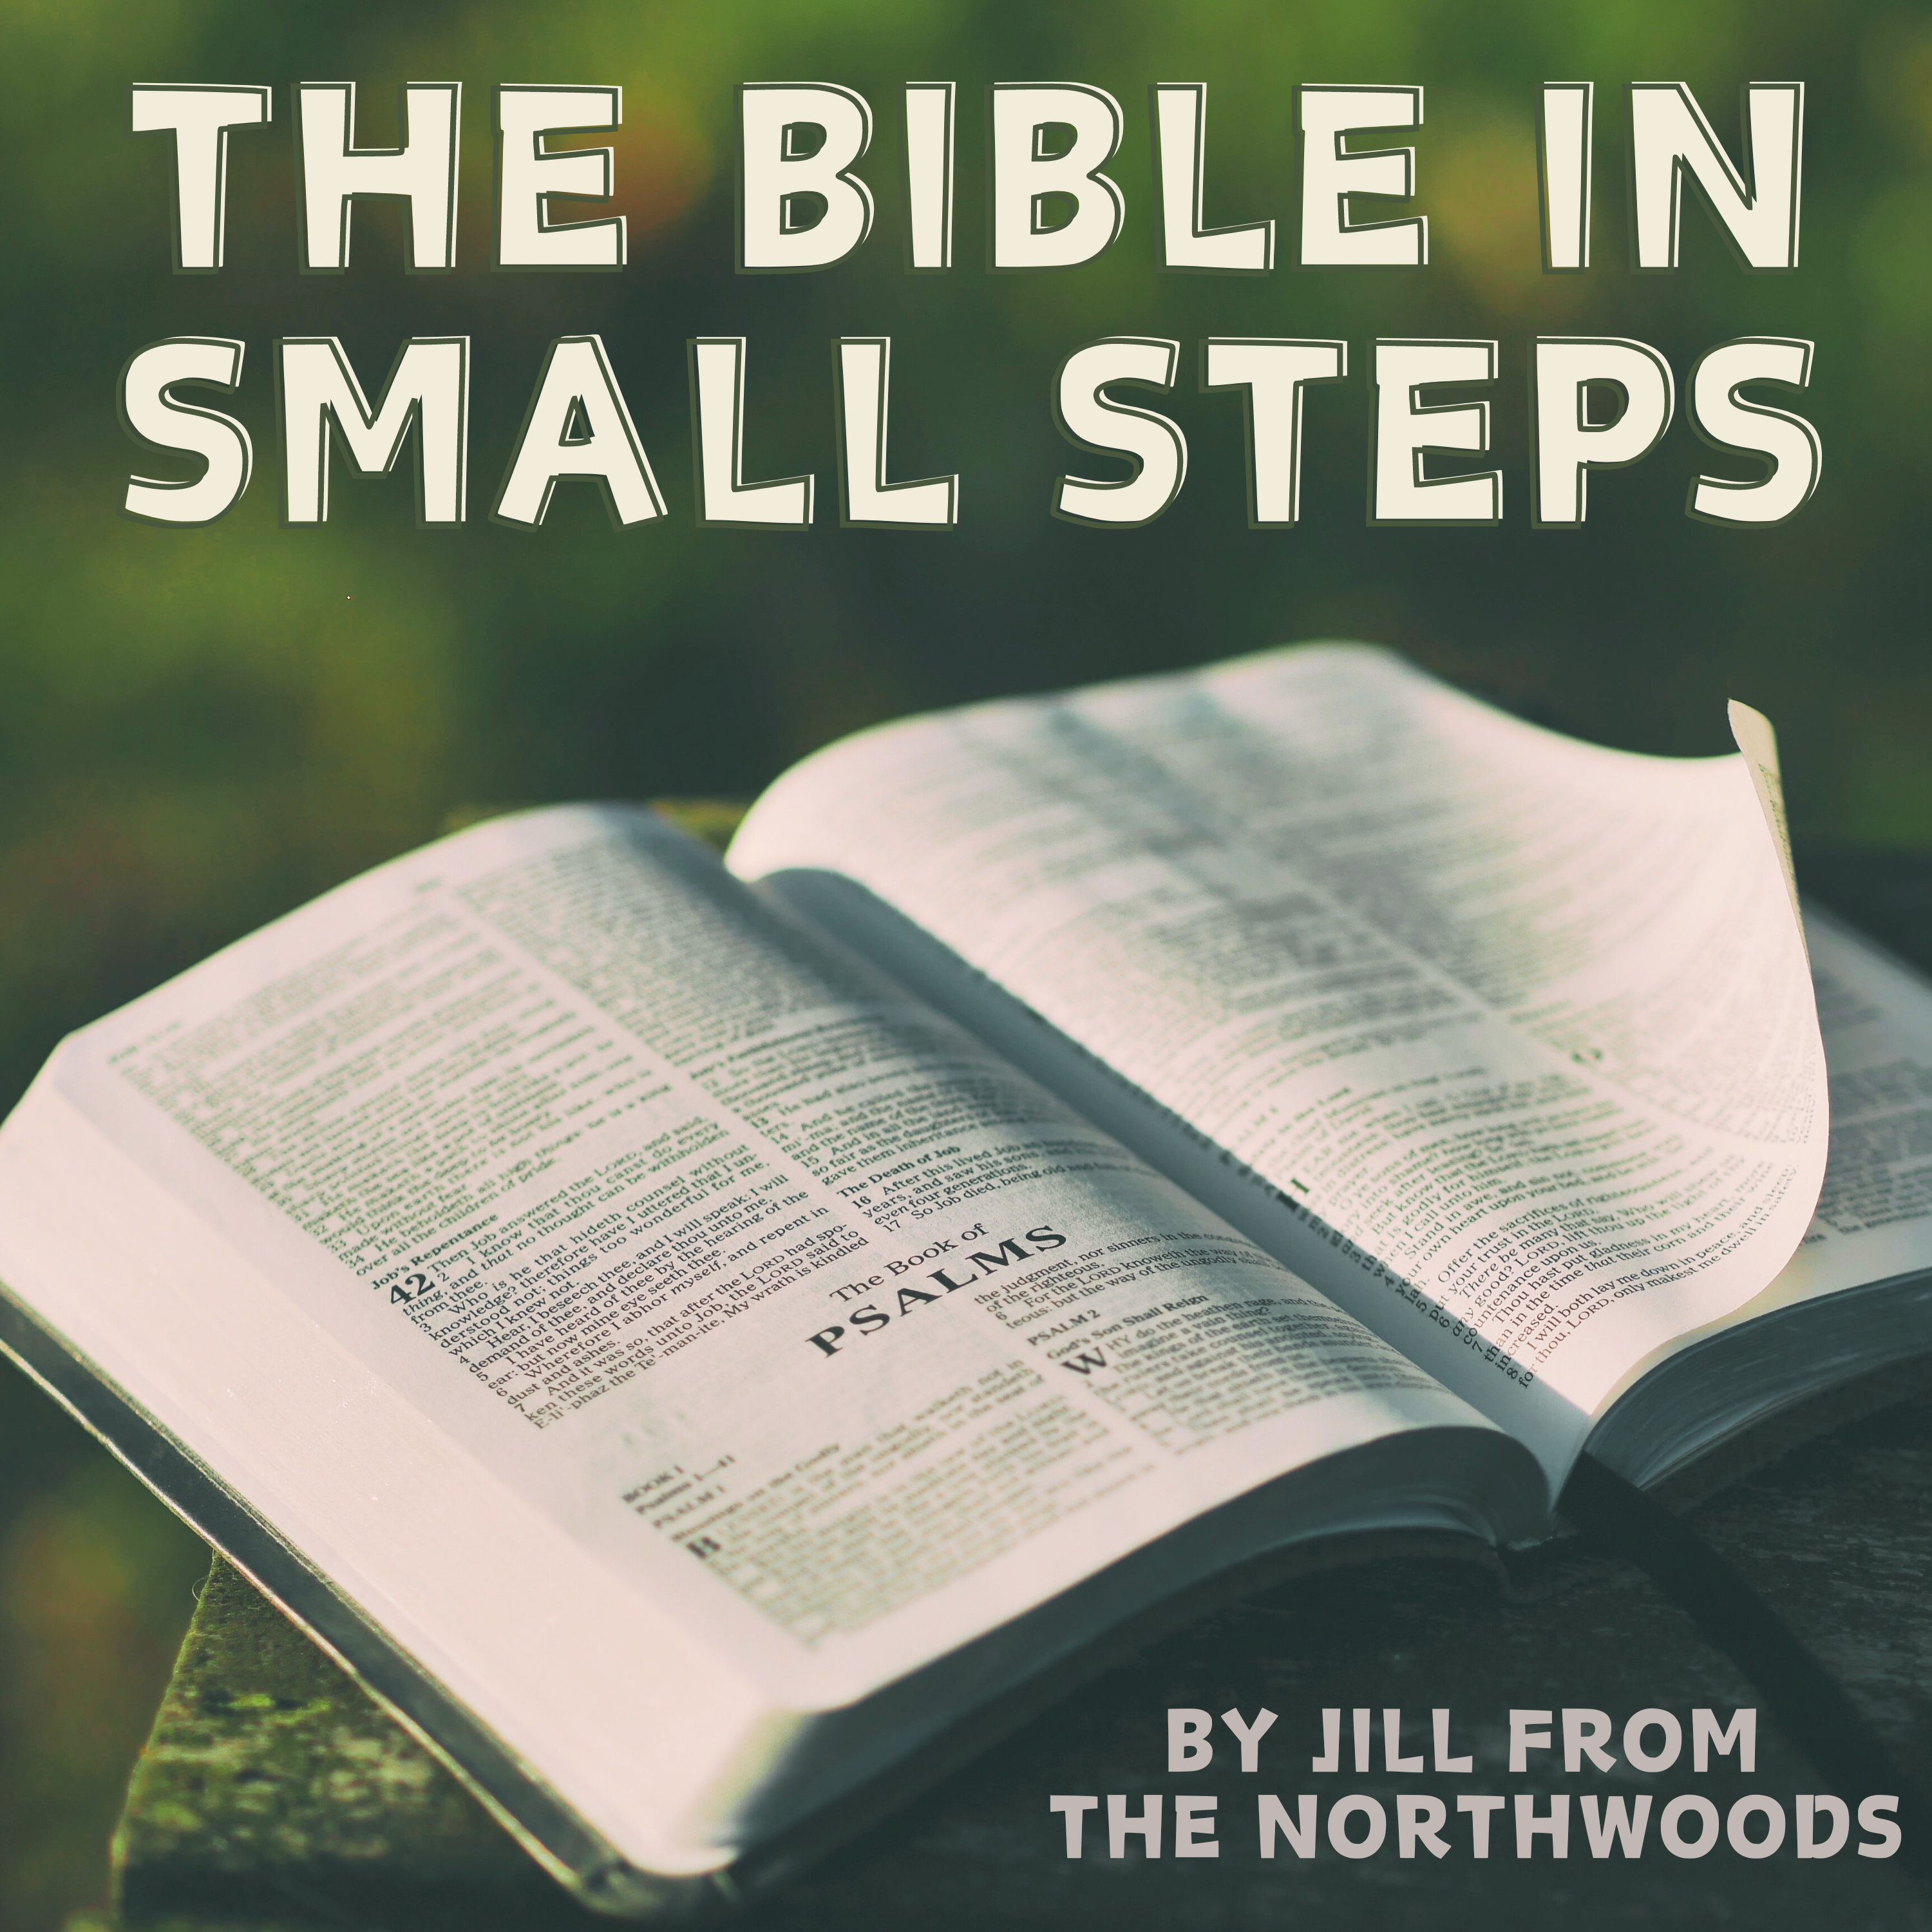 The Bible in Small Steps